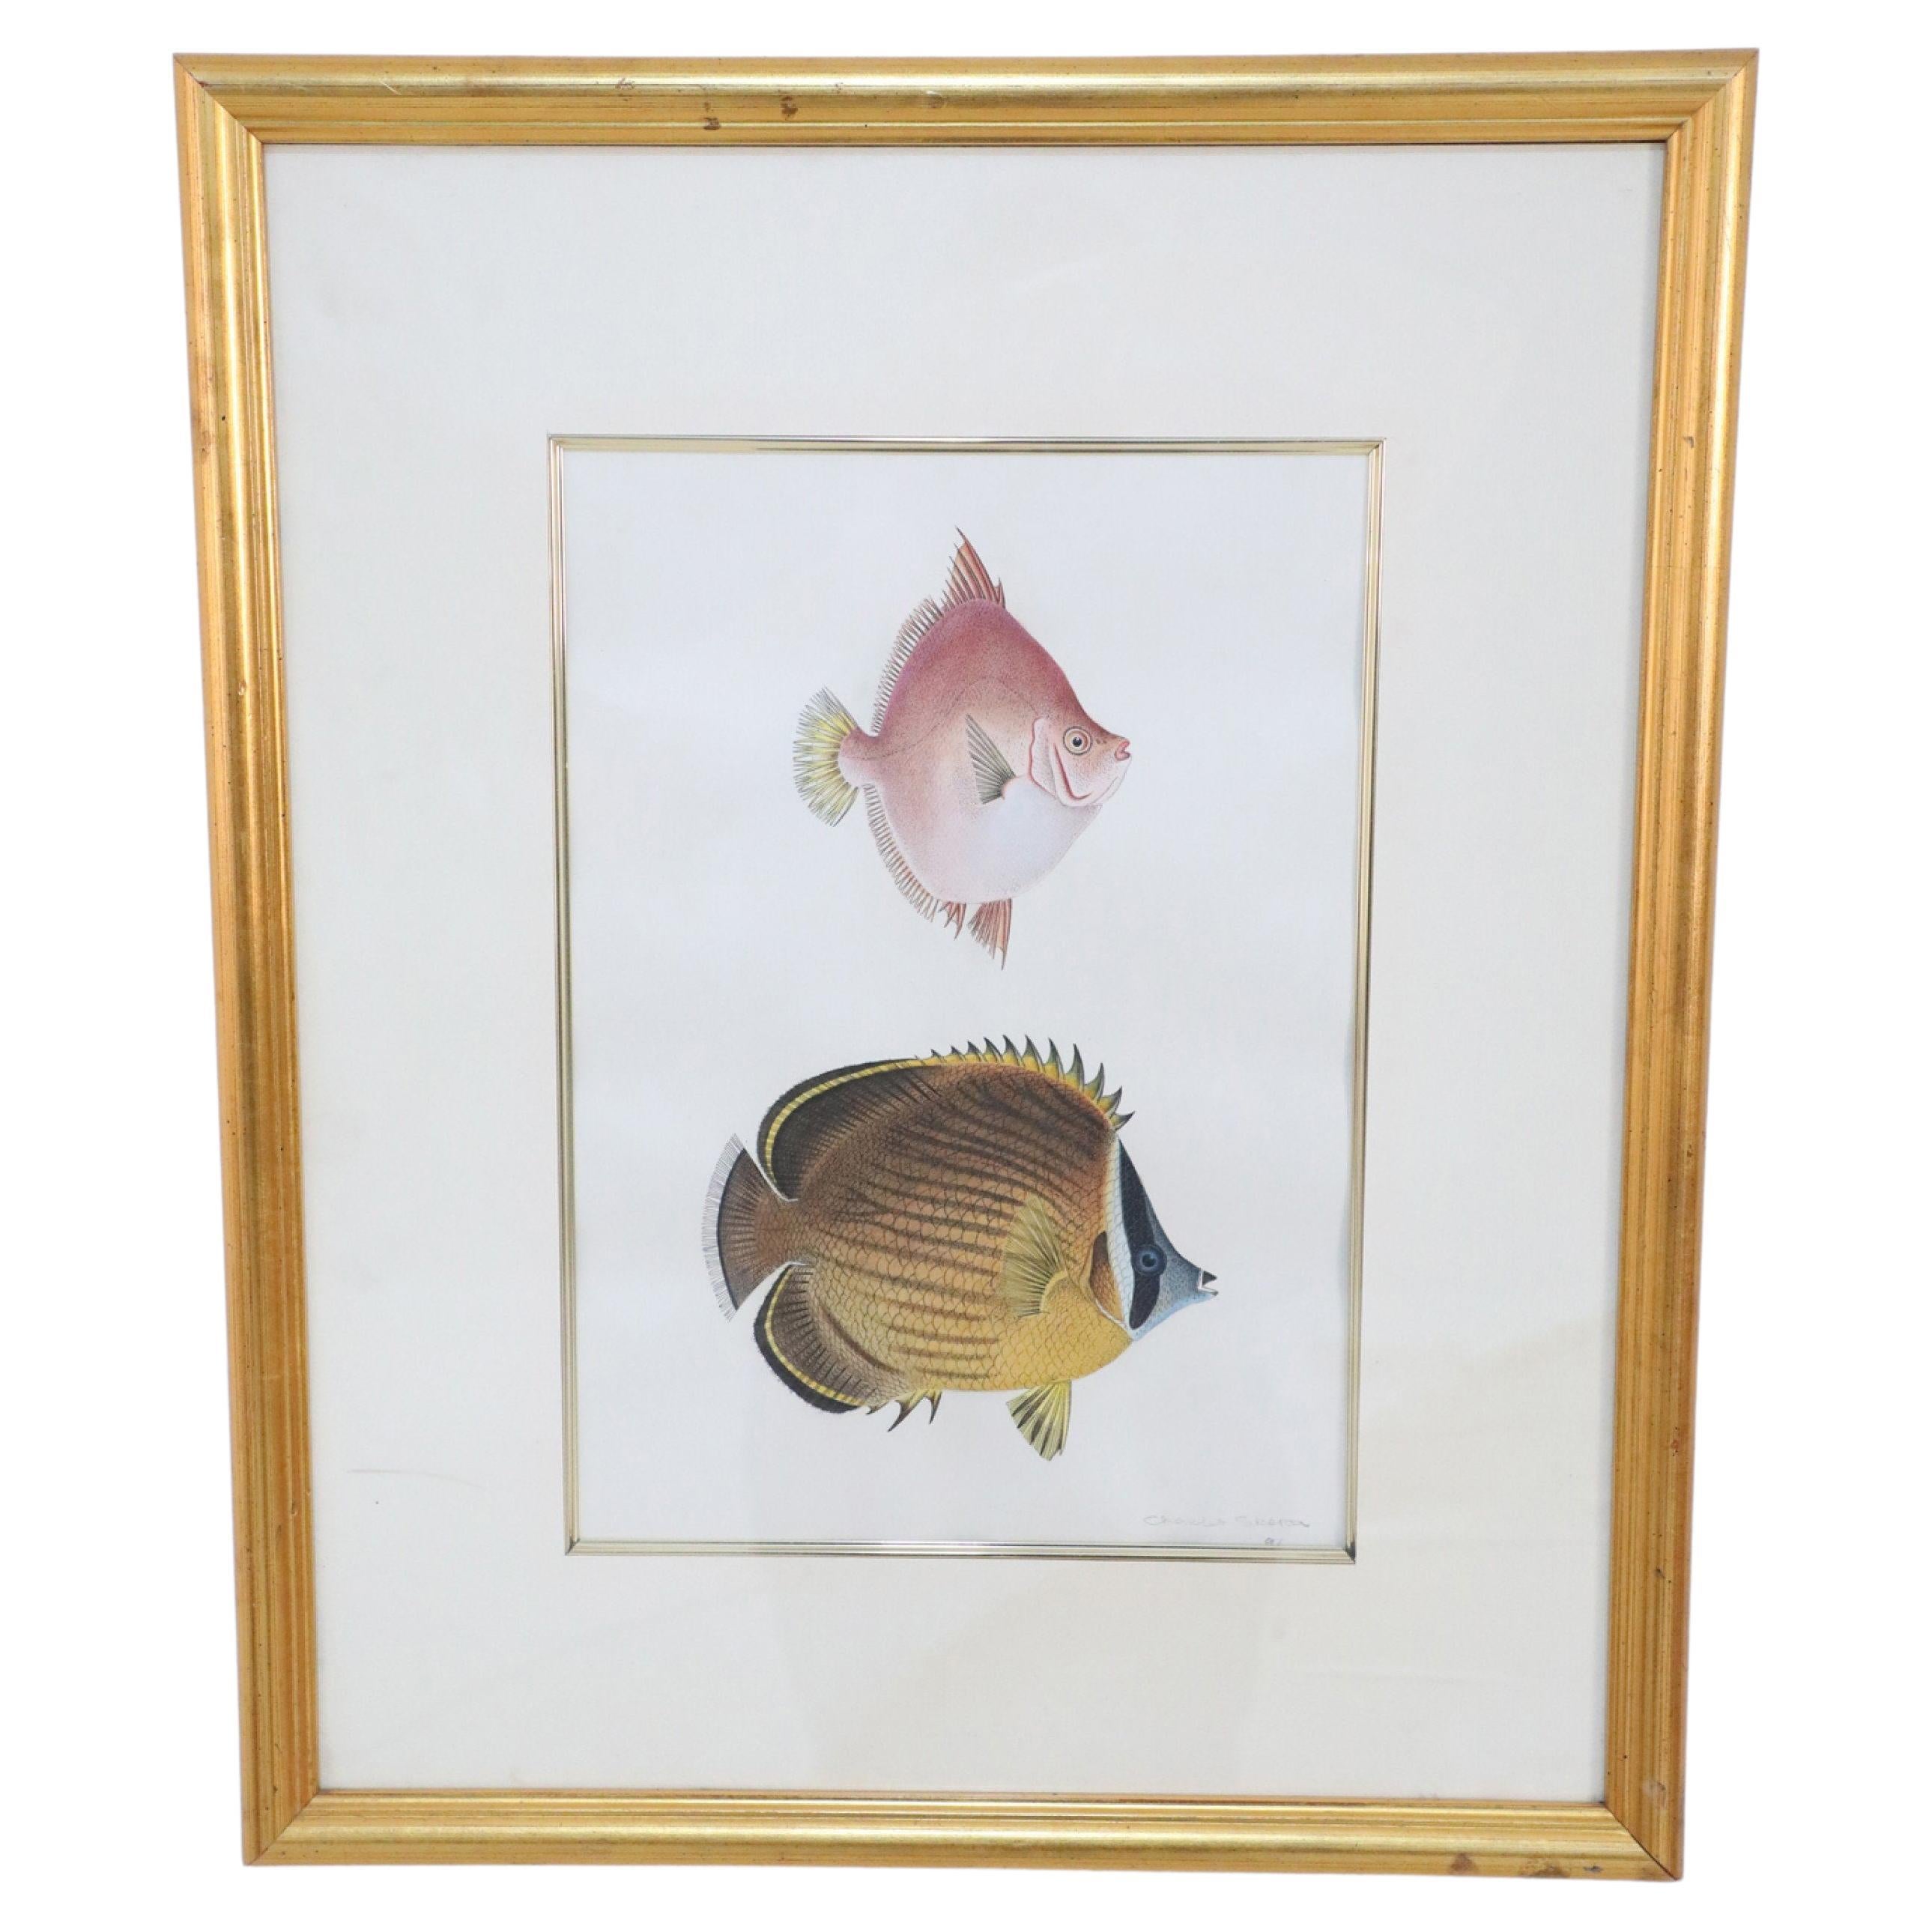 Framed Color Lithograph of Brown and Pink Tropical Fish